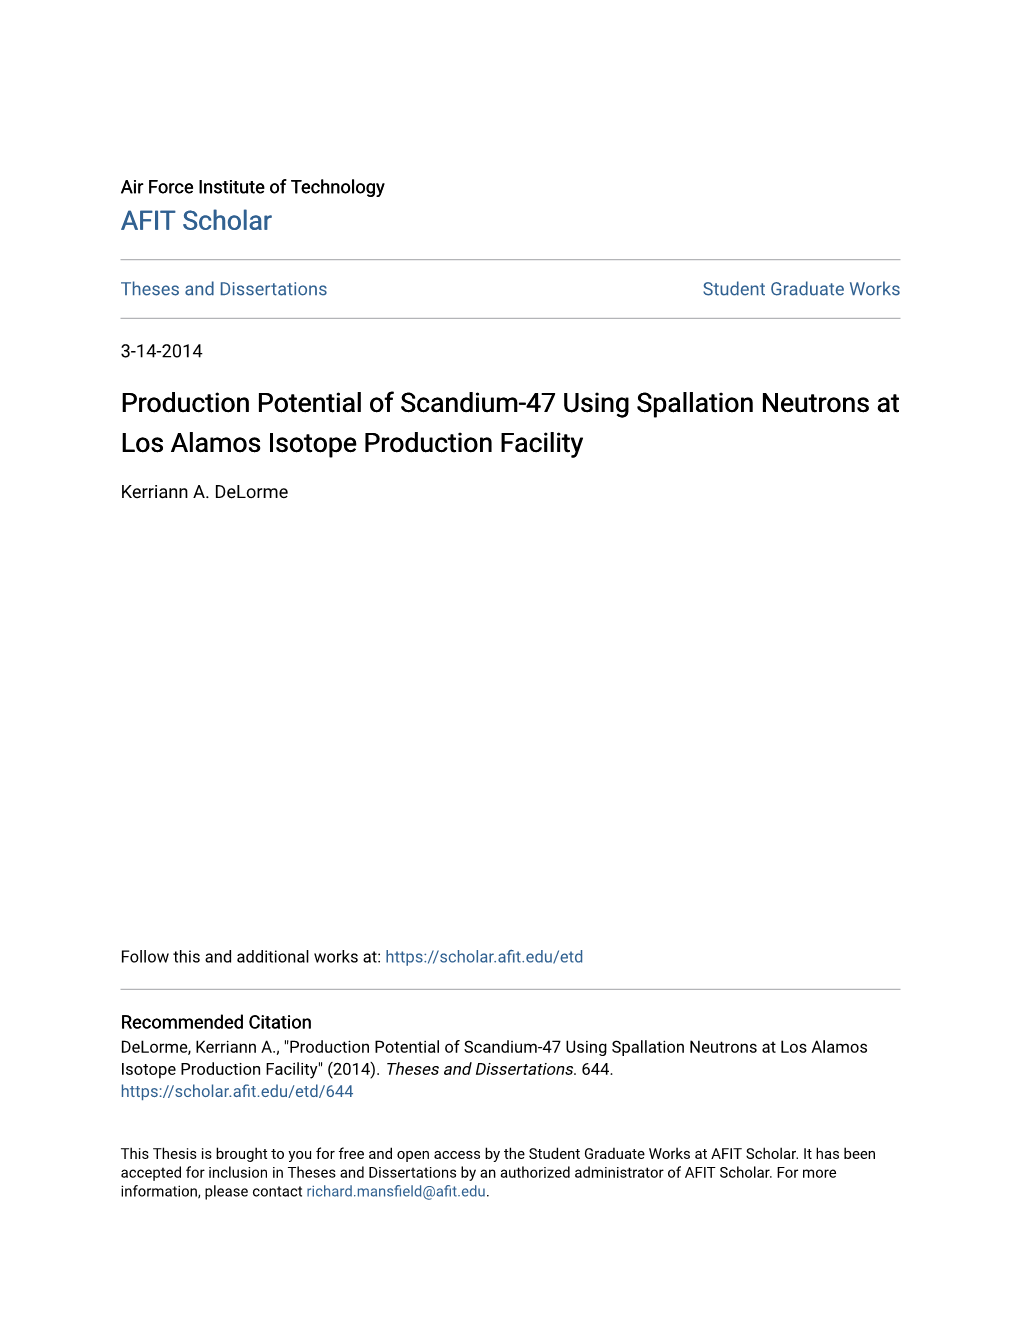 Production Potential of Scandium-47 Using Spallation Neutrons at Los Alamos Isotope Production Facility